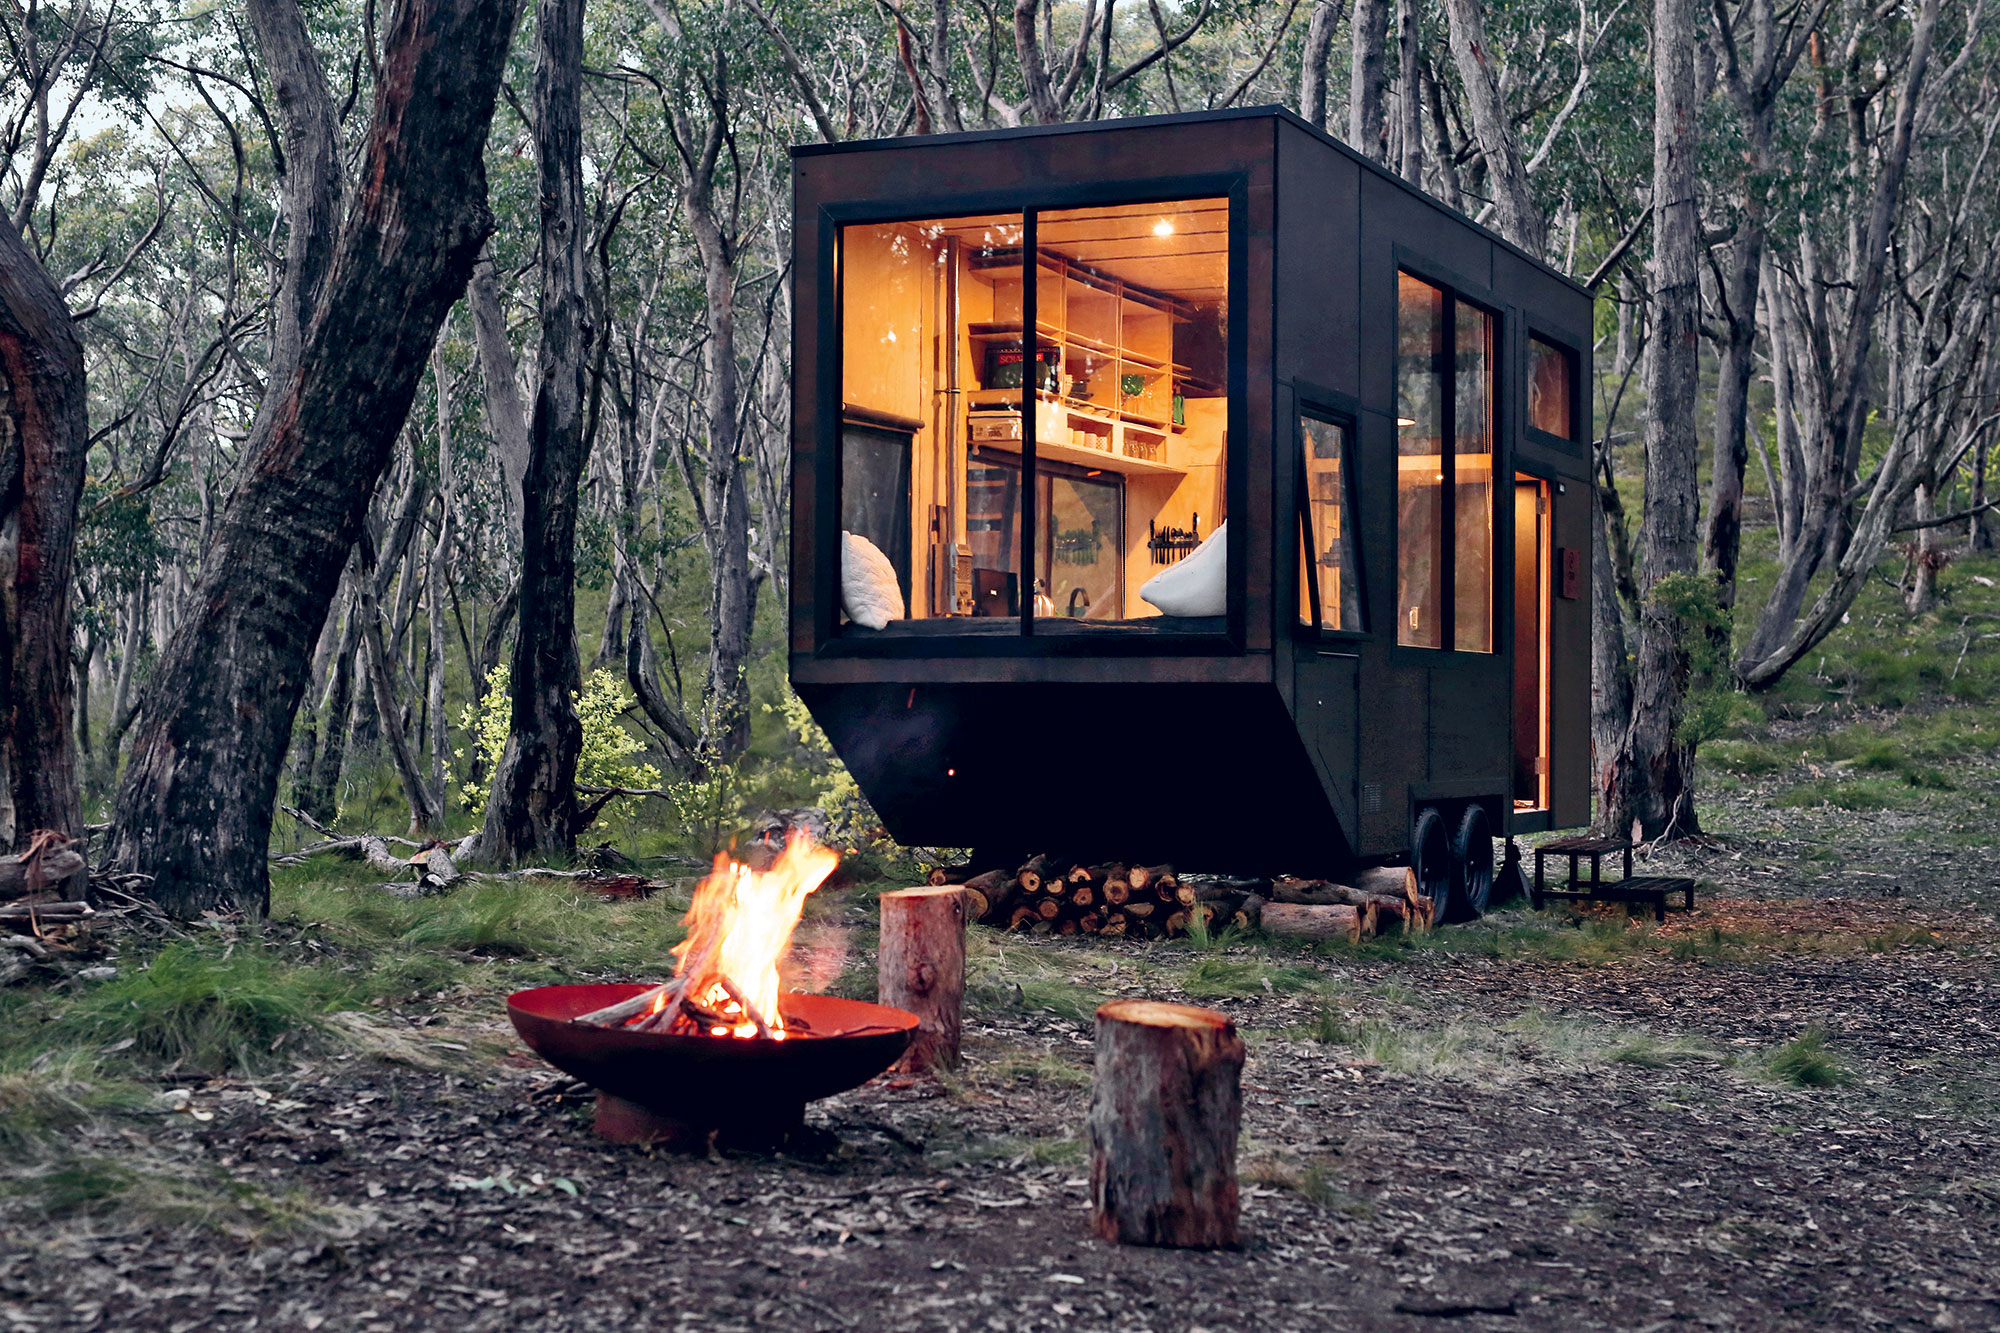 The Best Tiny Home Builders of 2021